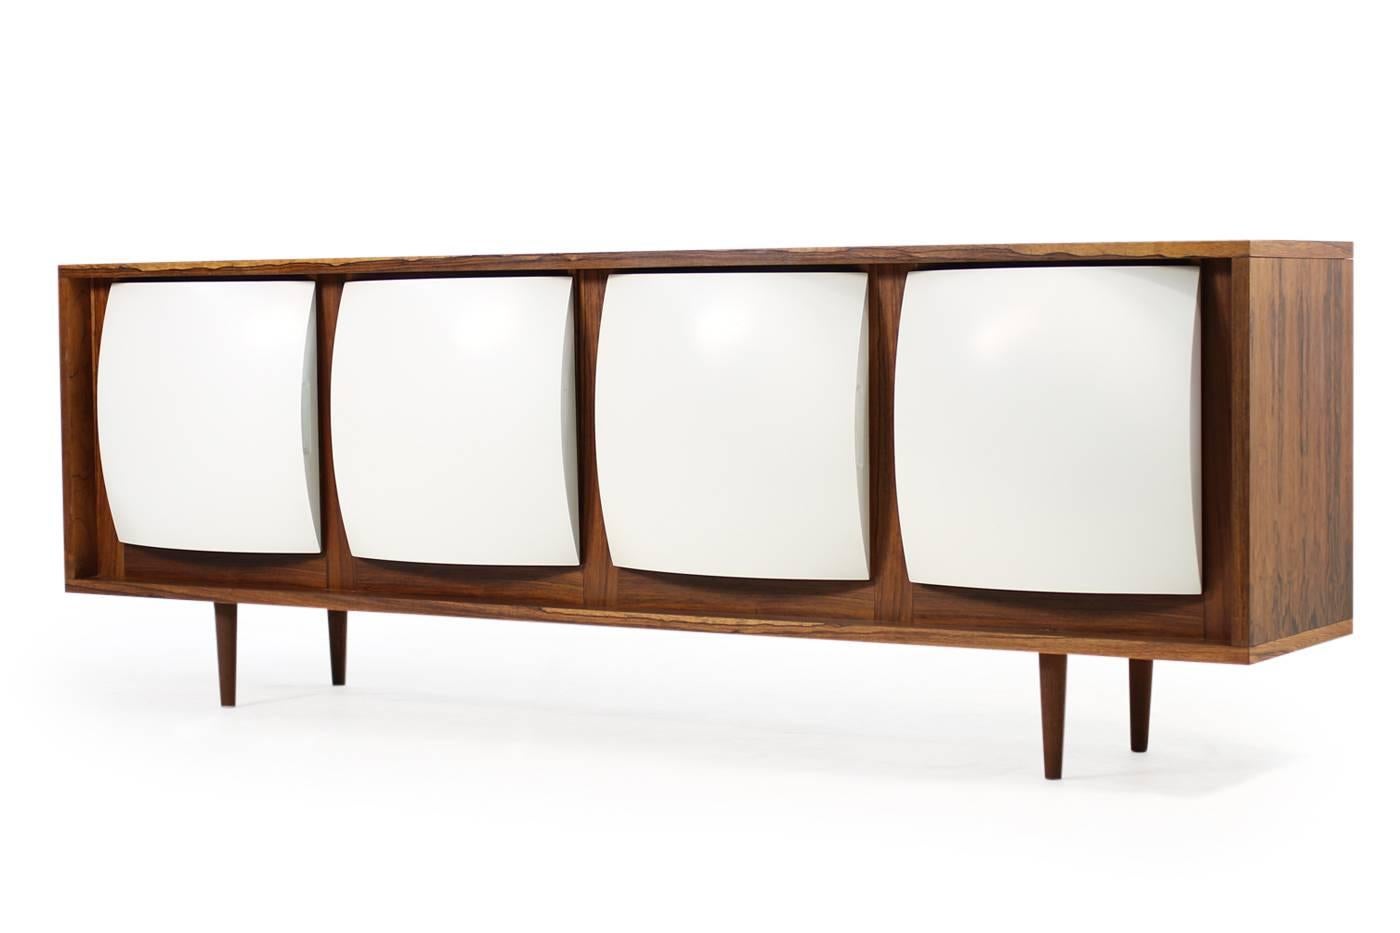 Super rare / unique and large 1970s rosewood Sideboard, heavy weight, four curved formica doors. Fantastic curved doors, a kind of plastic/formica. Maybe a prototype or made to order, we never saw it before, single piece, very heavy. Shelves inside,